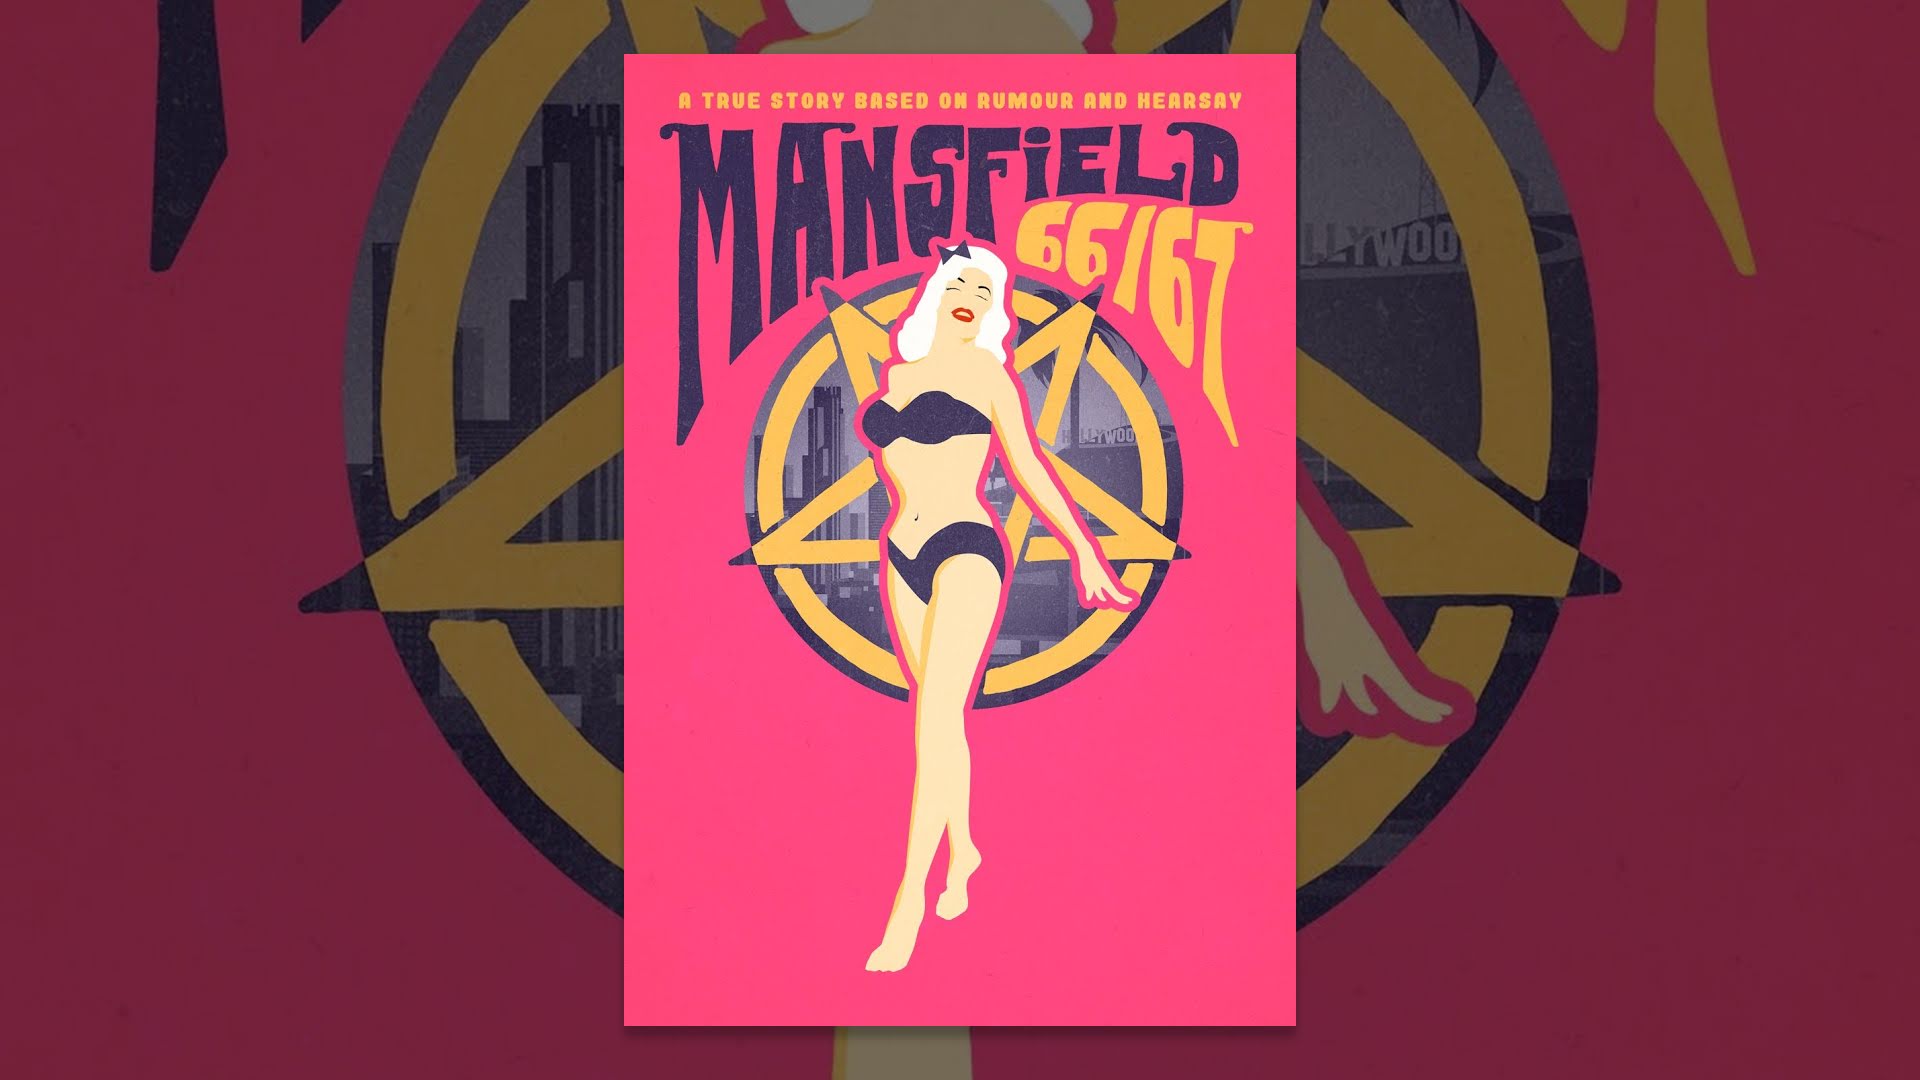 FILM REVIEW: ‘Mansfield 66/67’